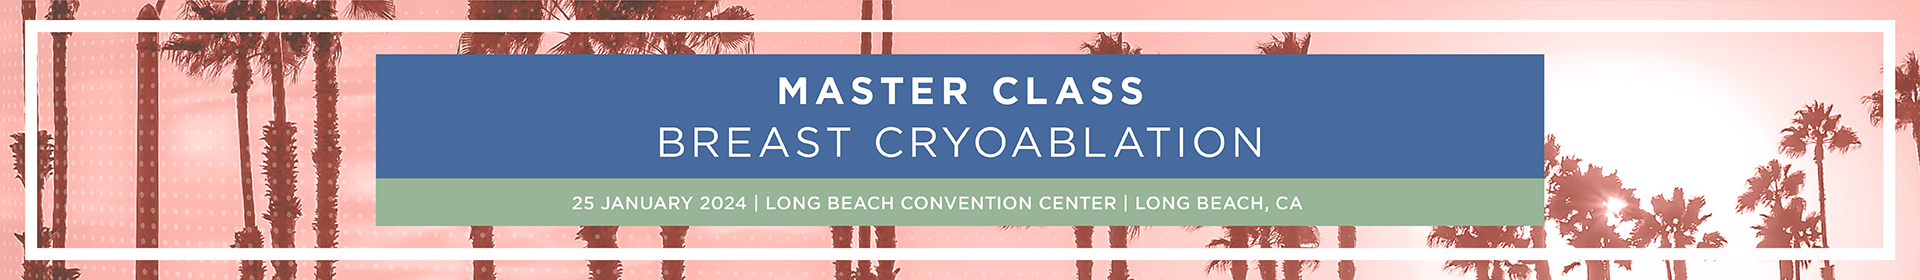  Breast Cryoablation Master Class